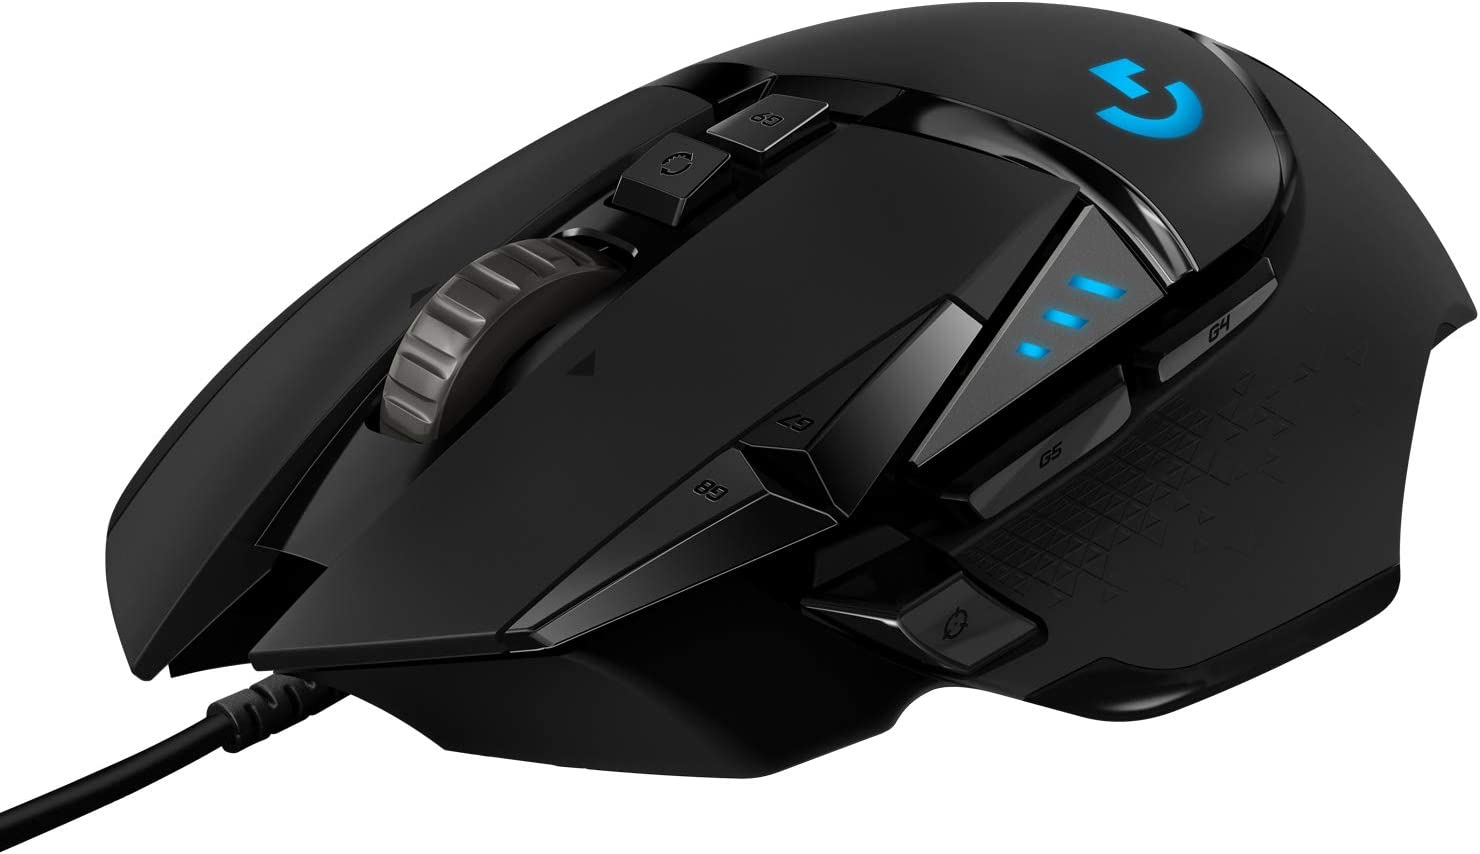 Logitech G502 HERO High-Performance Wired Gaming Mouse - Black (New)